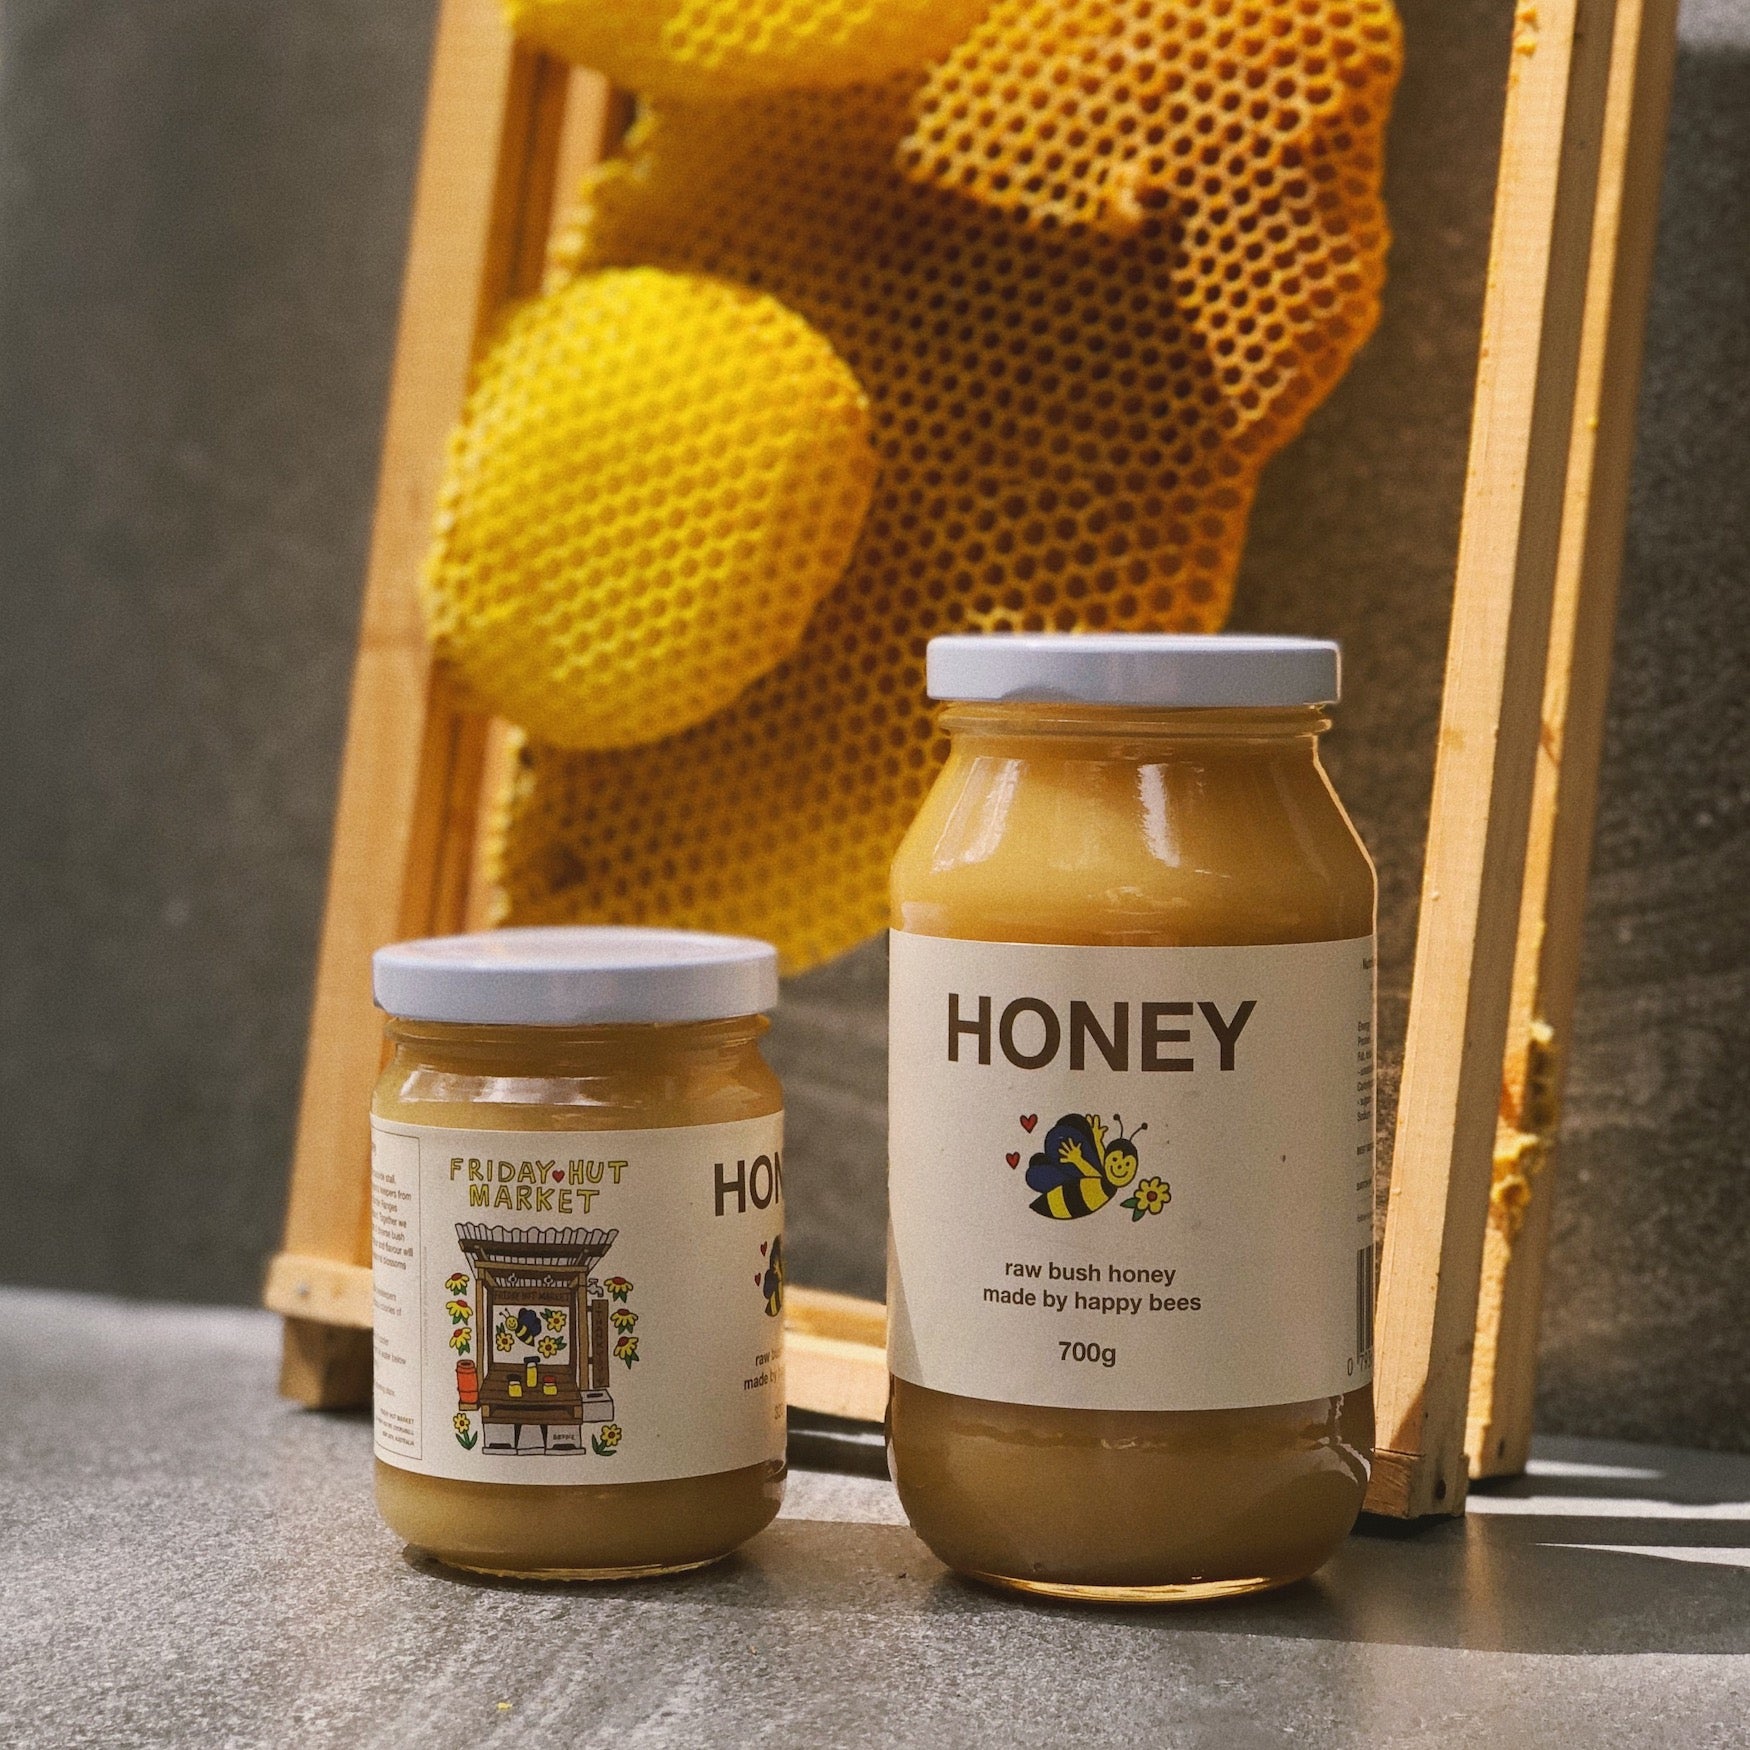 320g and 700g jars of Friday Hut Market Raw Bush Honey, made by happy bees. Frames from a beehive are in the background with golden beeswax honeycomb.